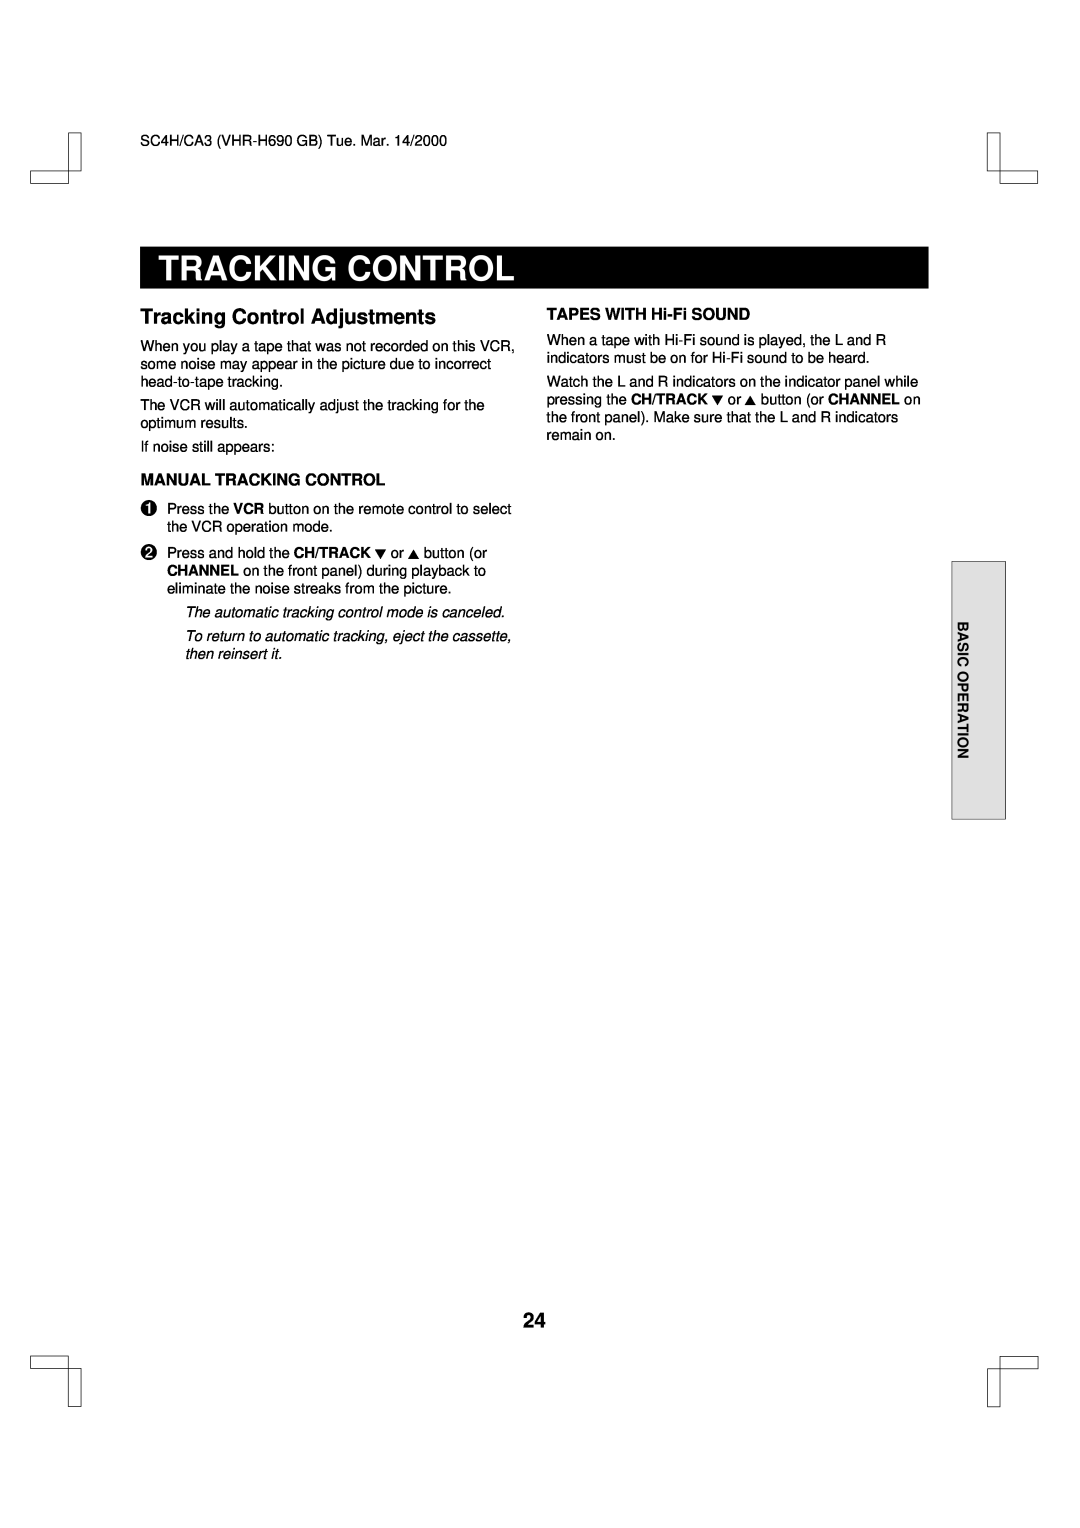 Sanyo VHR-H690 Tracking Control Adjustments, Manual Tracking Control, TAPES WITH Hi-Fi SOUND, Basic Operation 